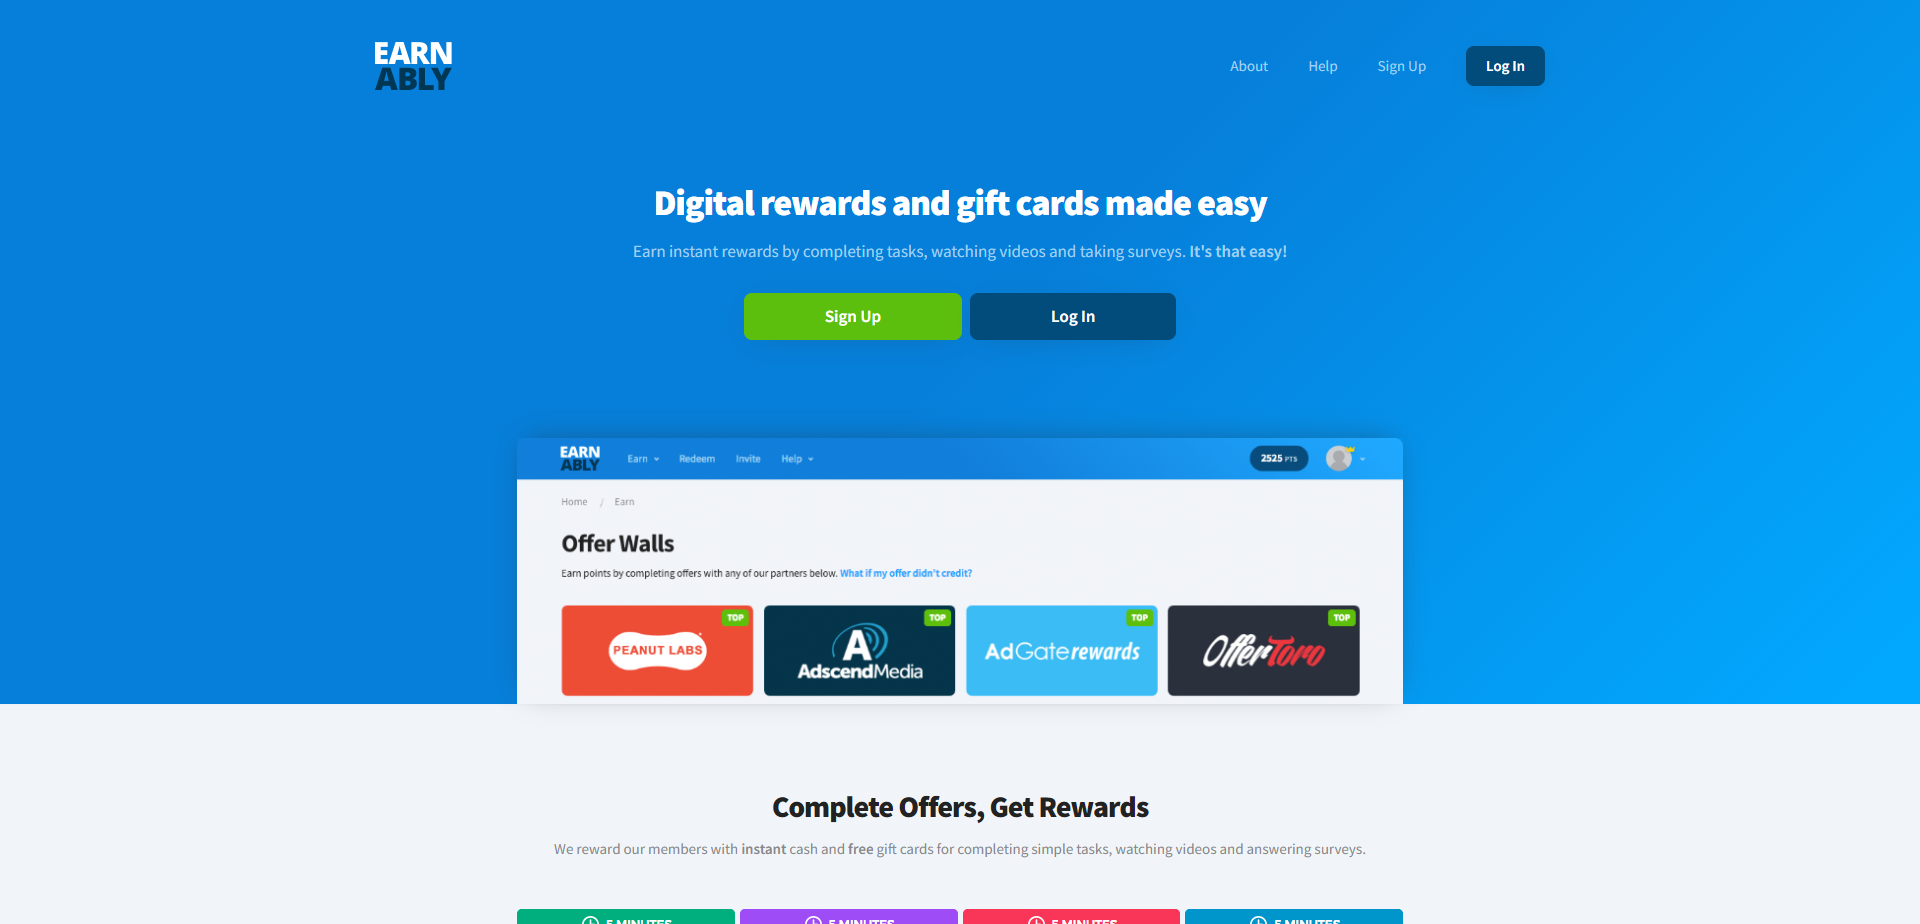 Landing Page for Earnably